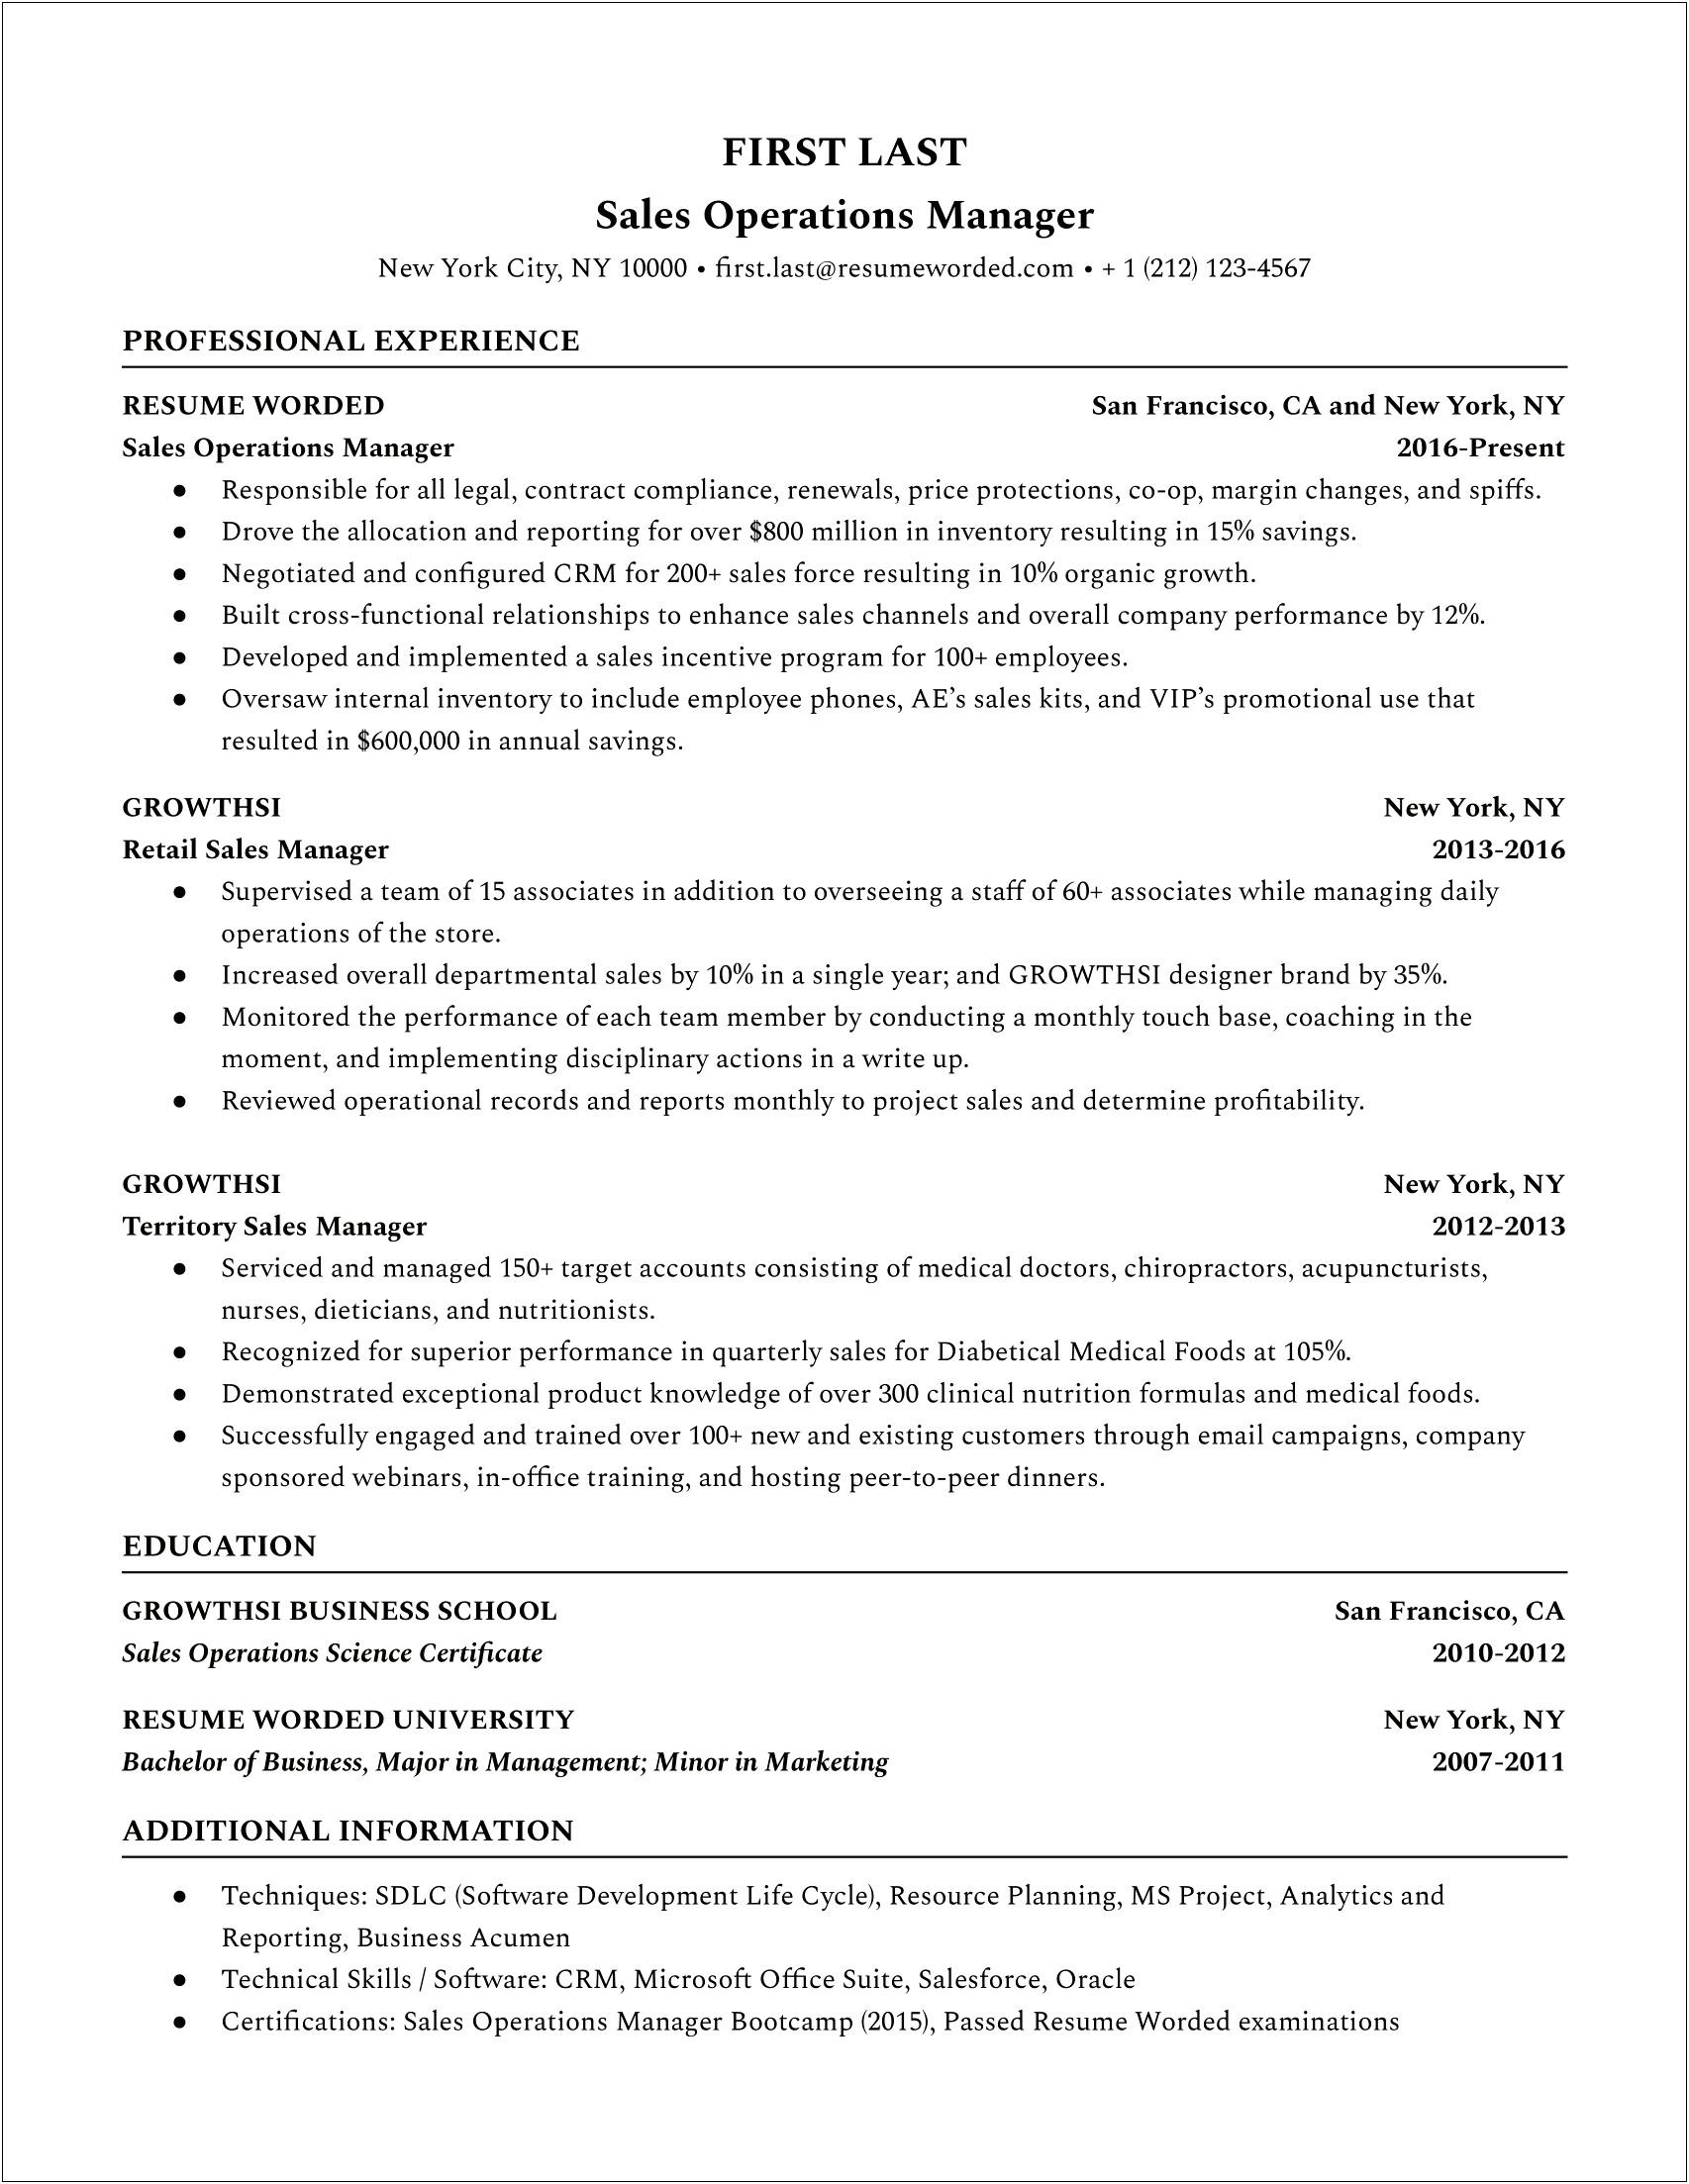 Resume Of A Operations Manager In Auto Transport